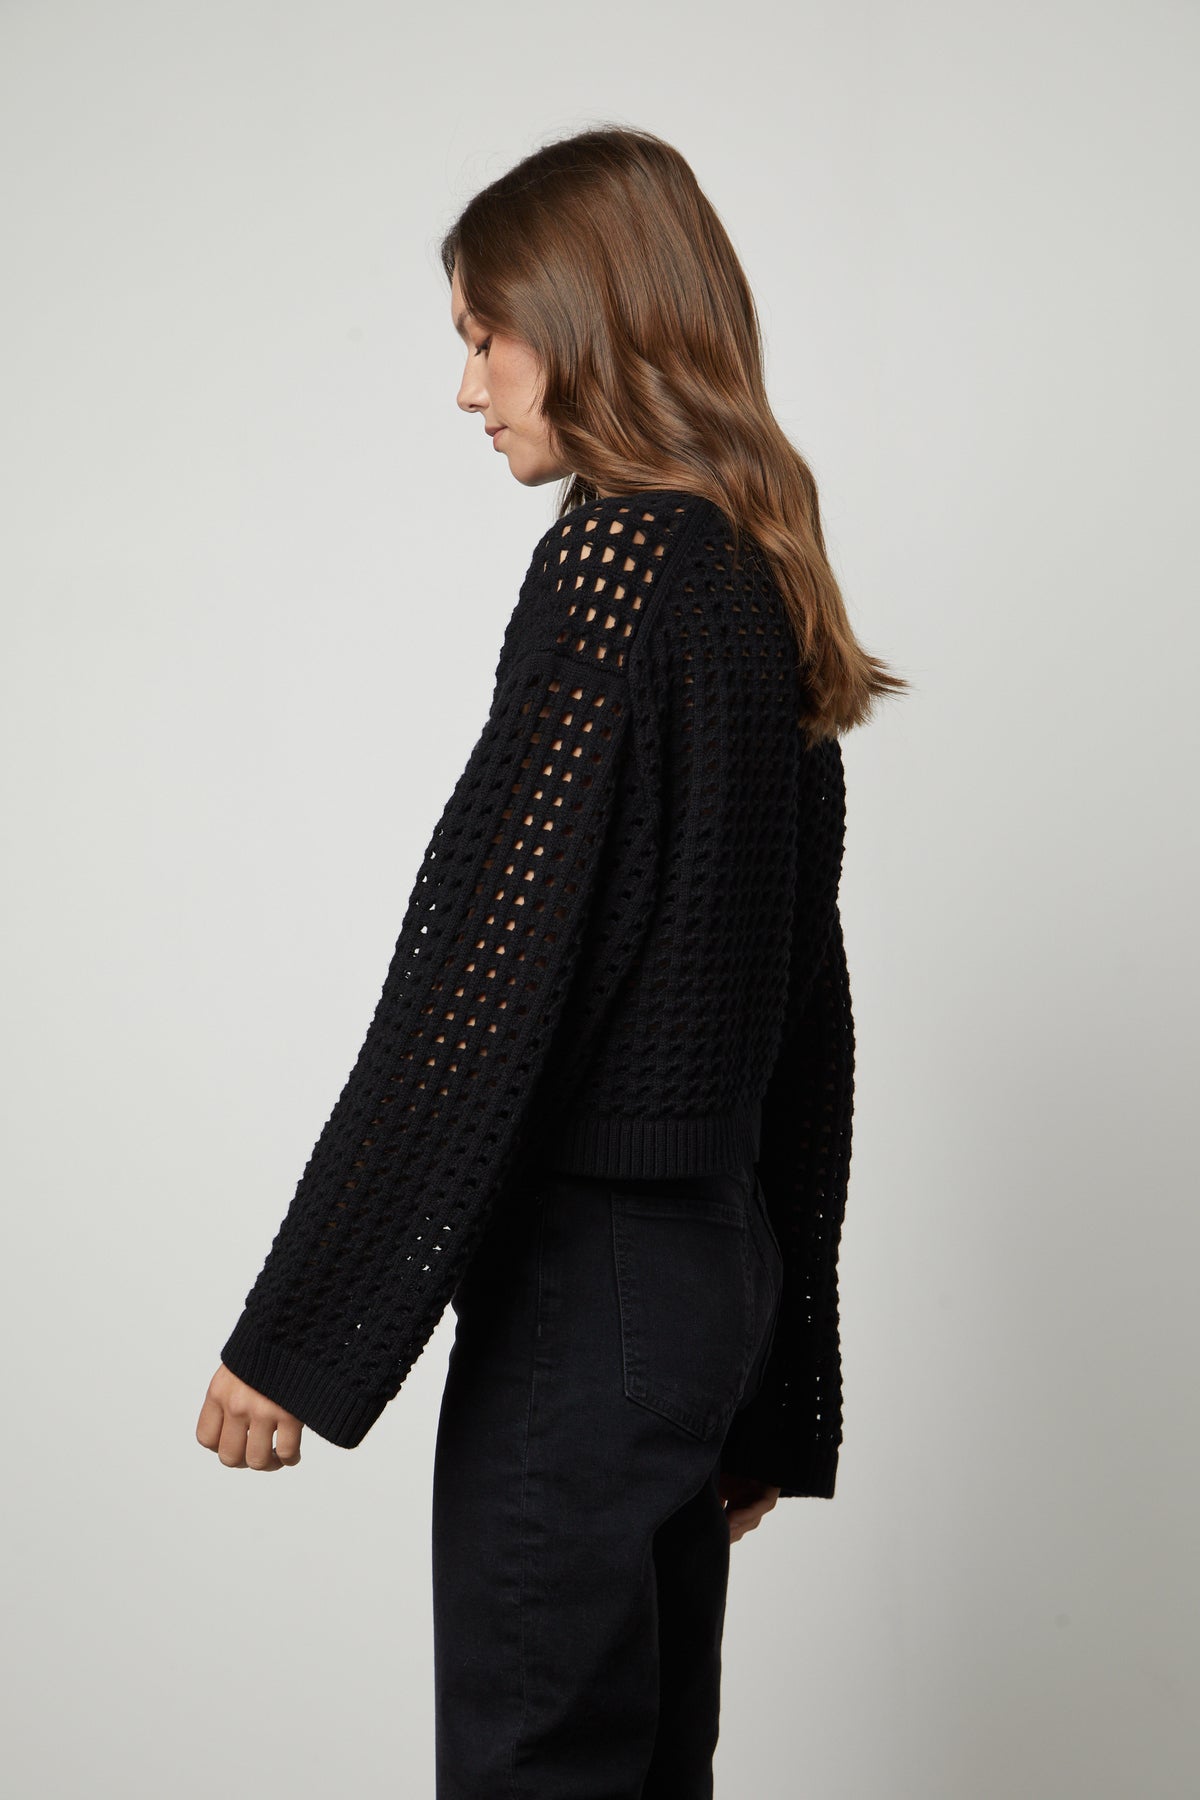 The back view of a woman wearing a Velvet by Graham & Spencer SAMMIE MESH KNIT CREW NECK SWEATER.-26910428692673